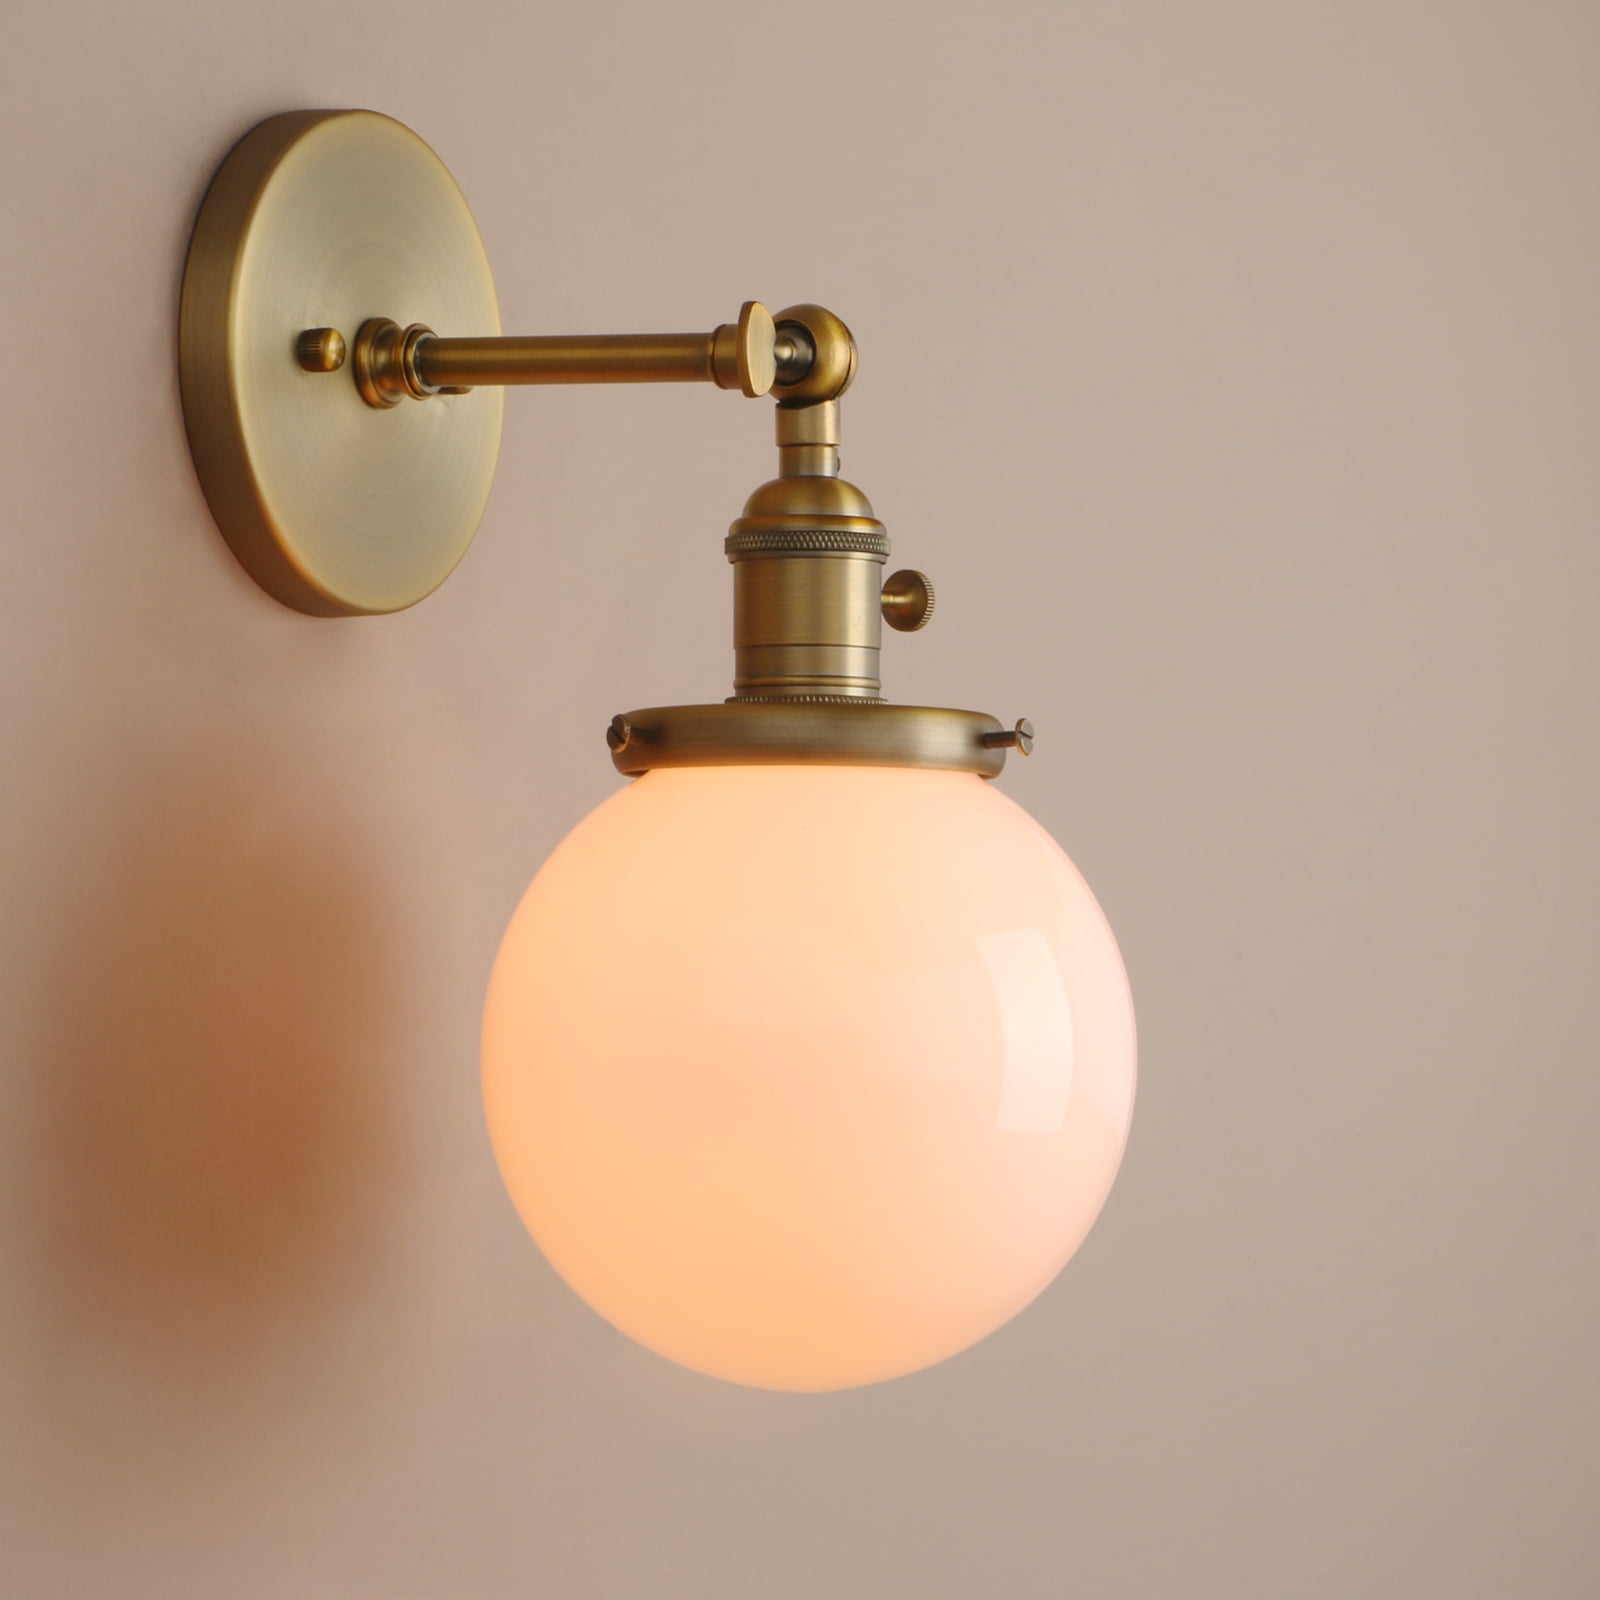 PATHSON RETRO INDUSTRIAL HANGING LIGHT ANTIQUE HOLDER PLUG IN WALL LAMP SCONCE 